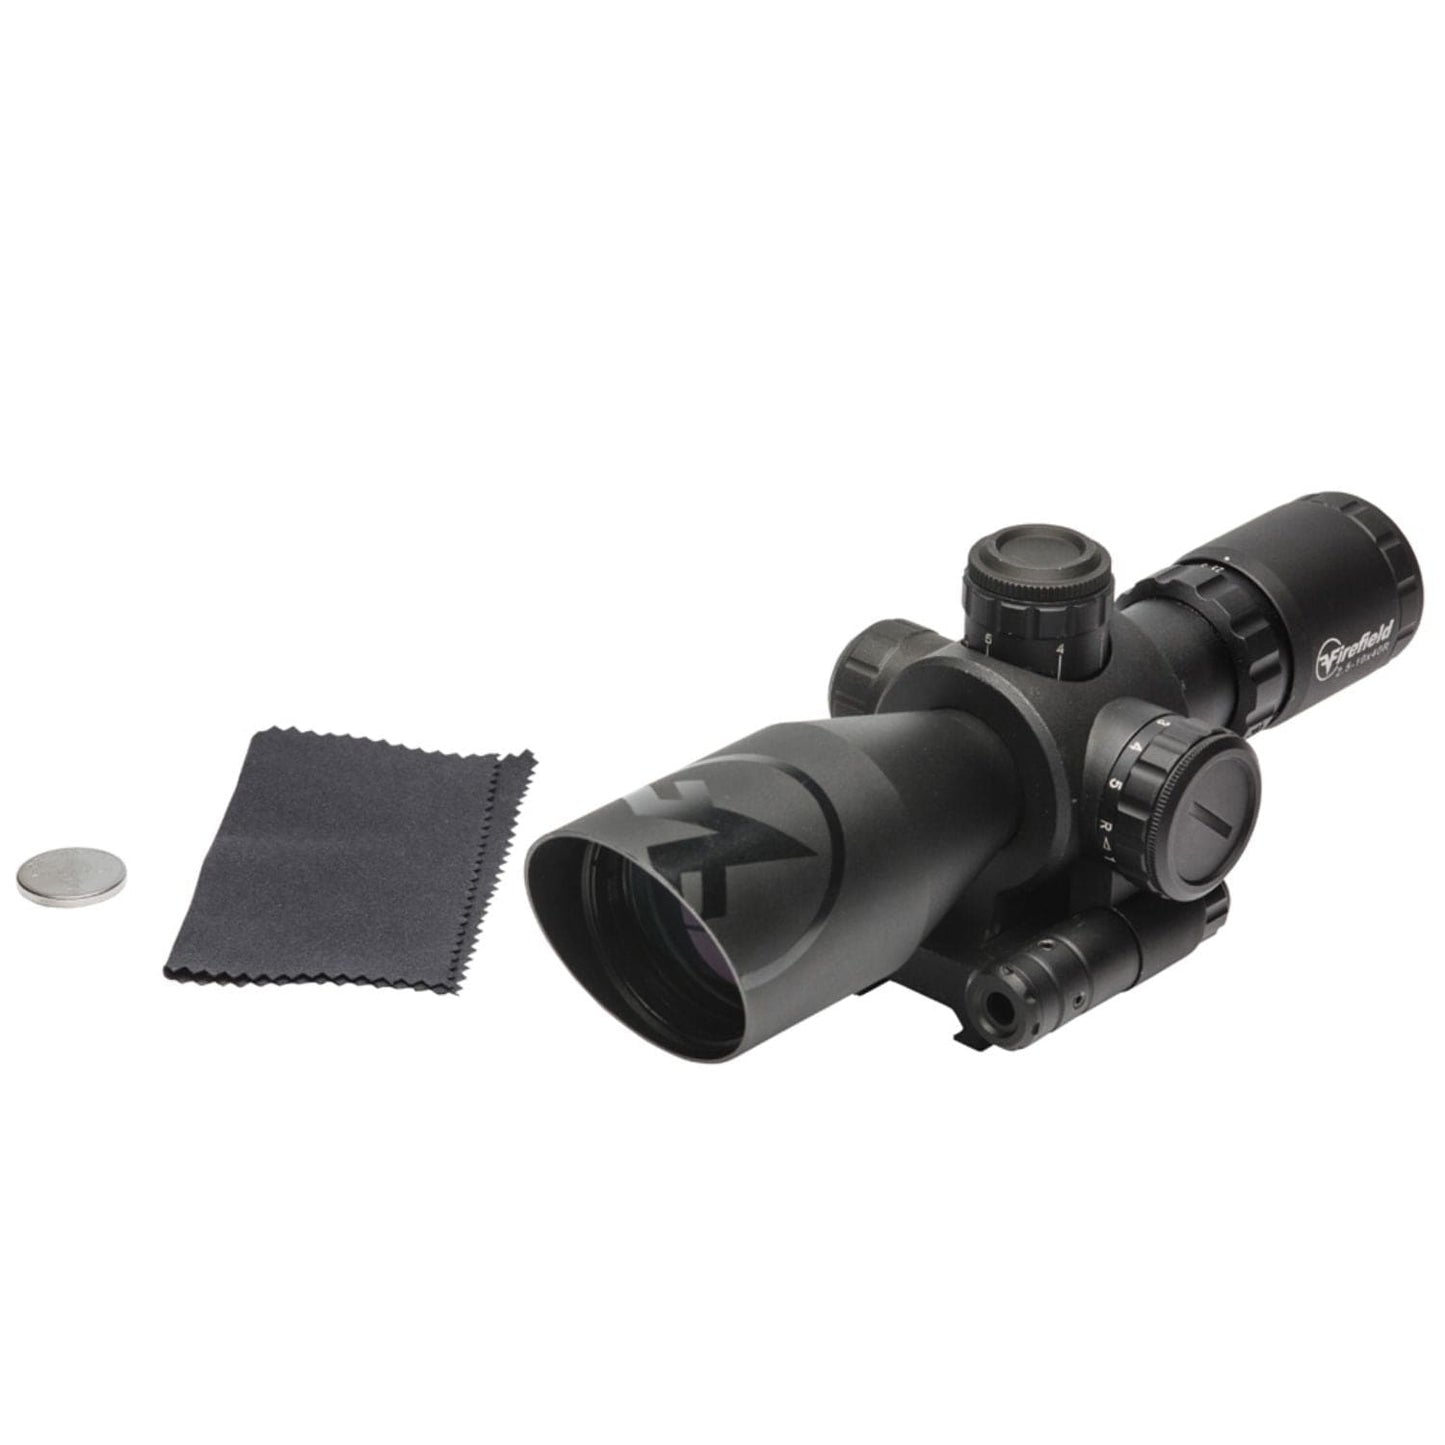 Firefield Barrage Riflescope with Laser by Texas Fowlers